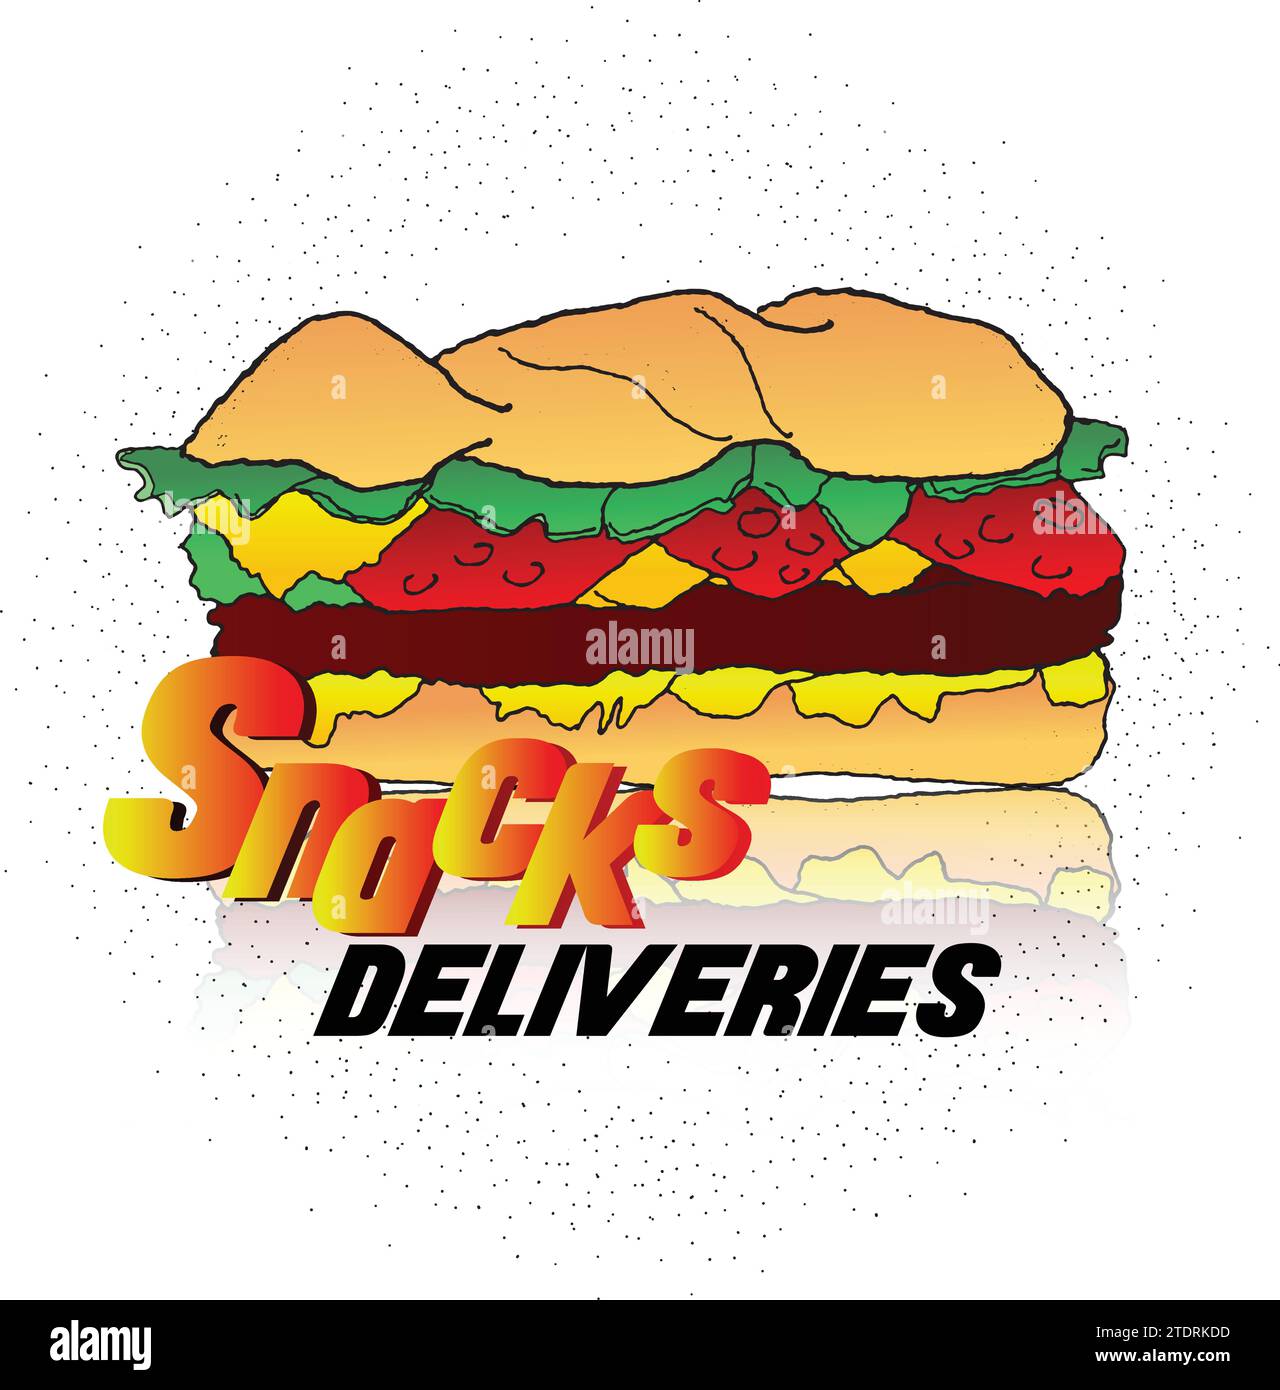 SNACK POSTER, DELIVERIES Stock Vector